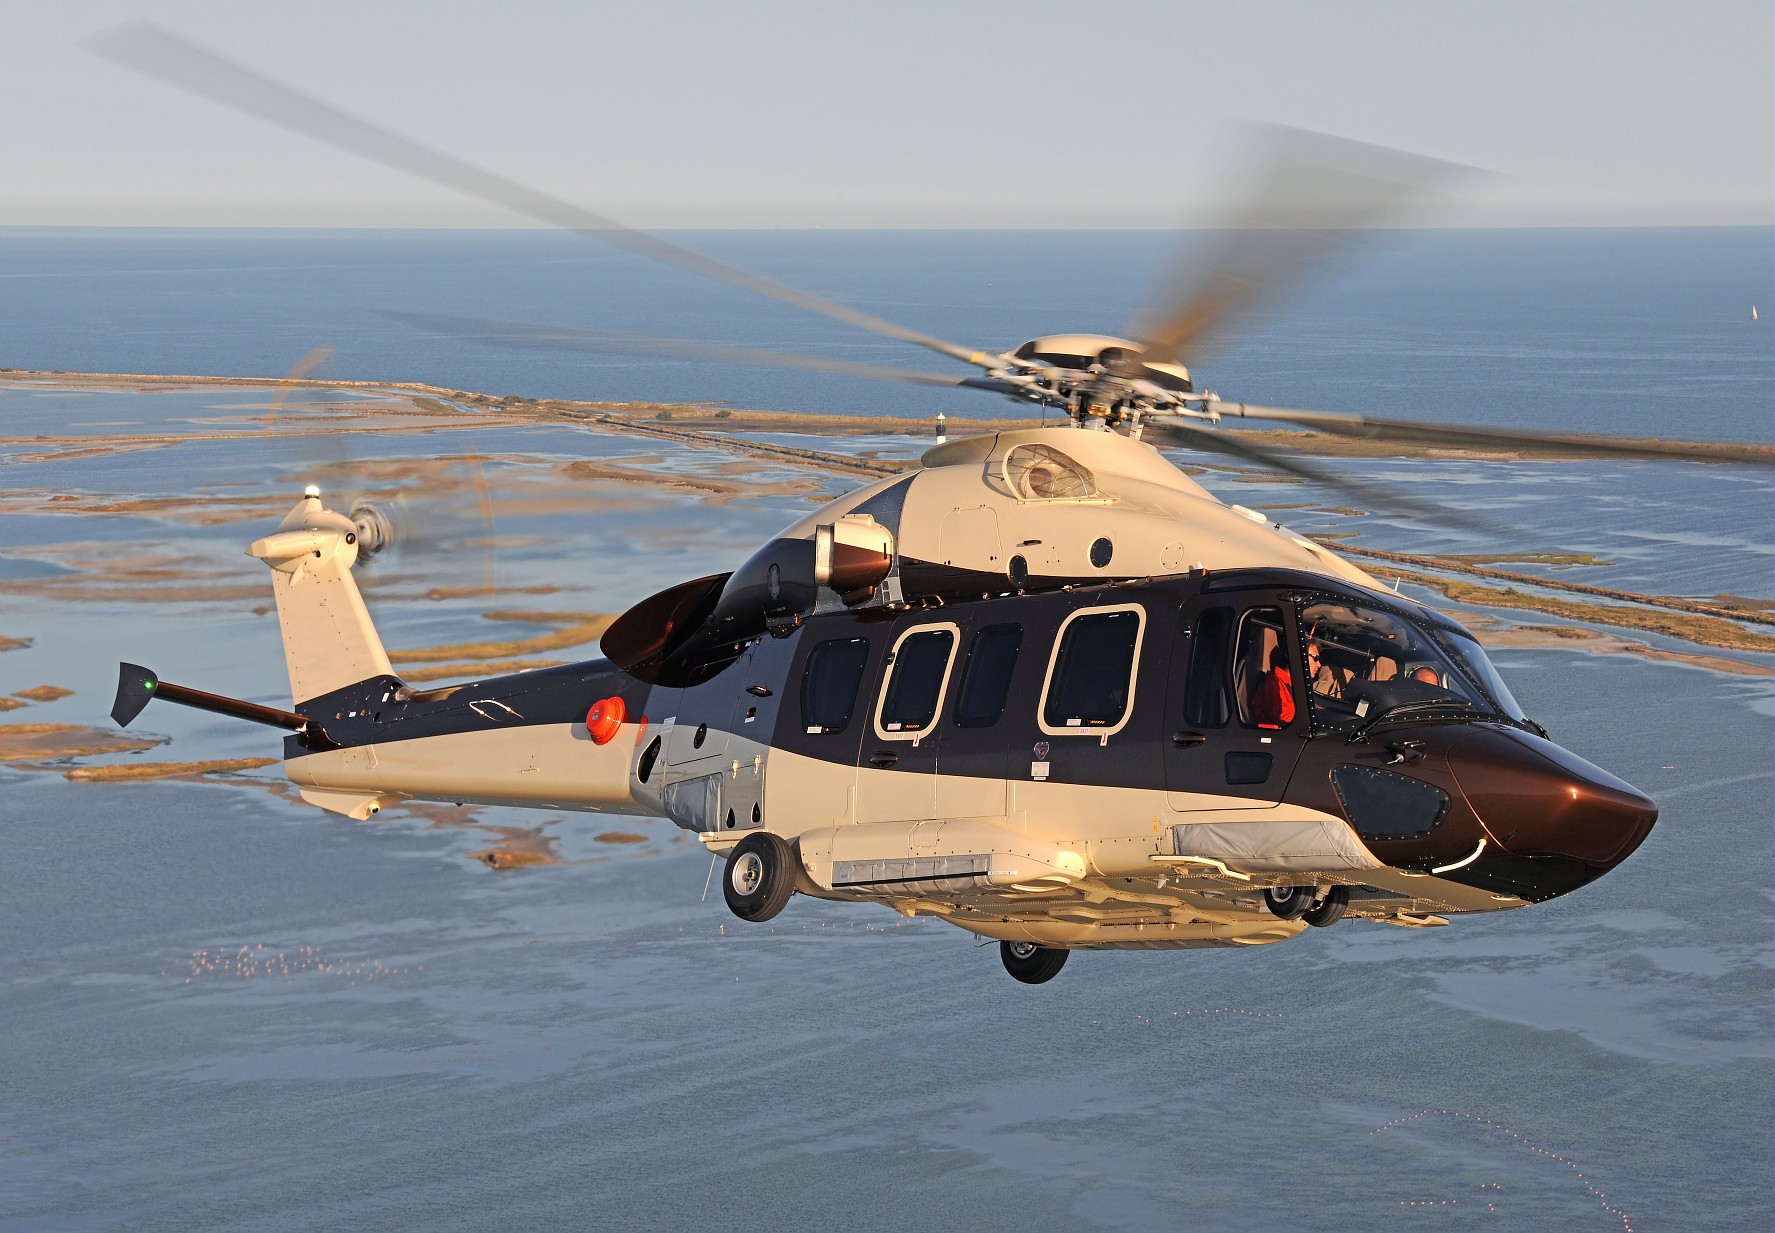 The H160 will see its first commercial contract in 2018, and Airbus hopes the aircraft will help it capture a large share of the future medium-lift rotorcraft market. Airbus Helicopters Photo